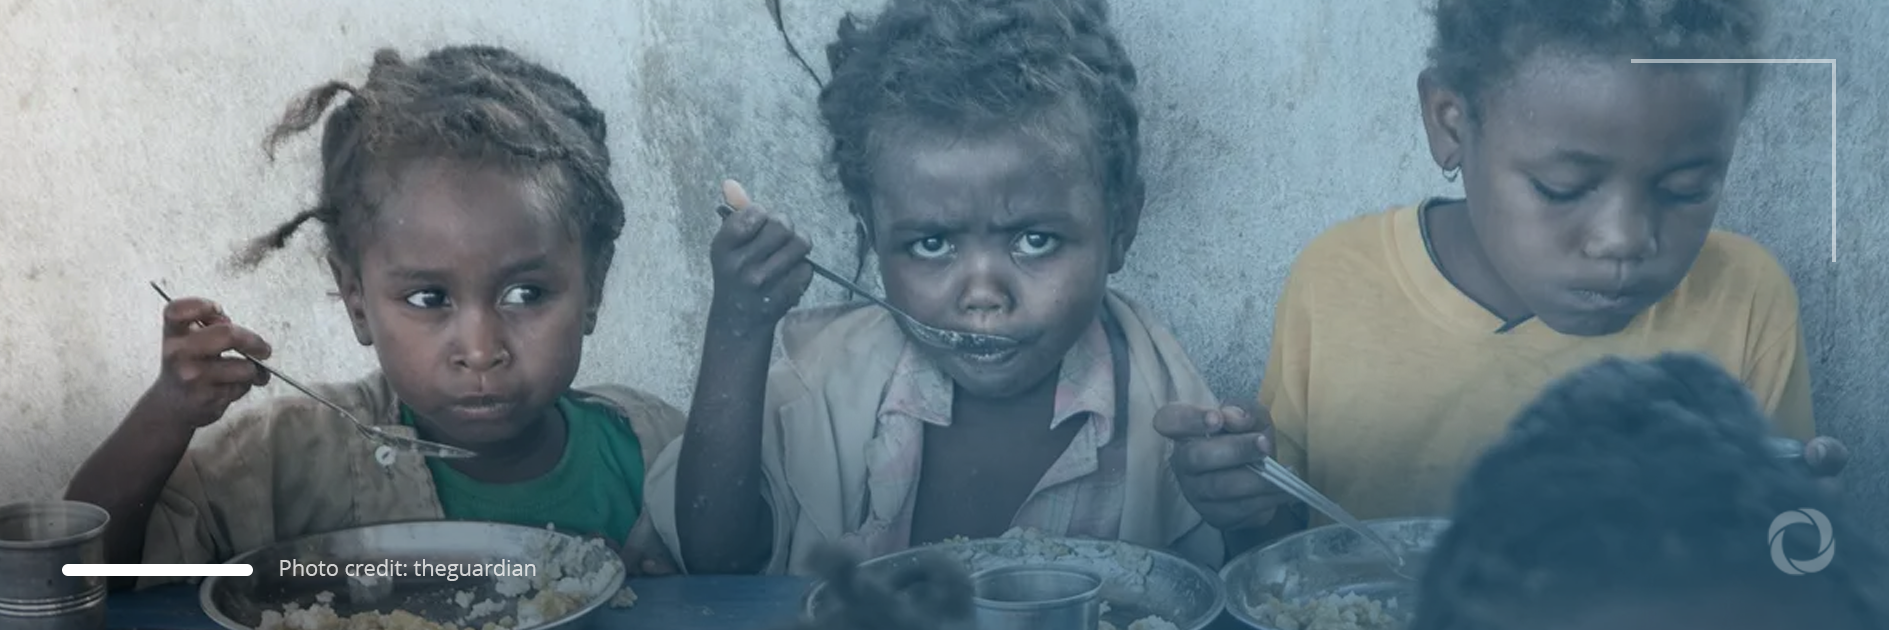 Double burden of malnutrition: What is South Africa doing?